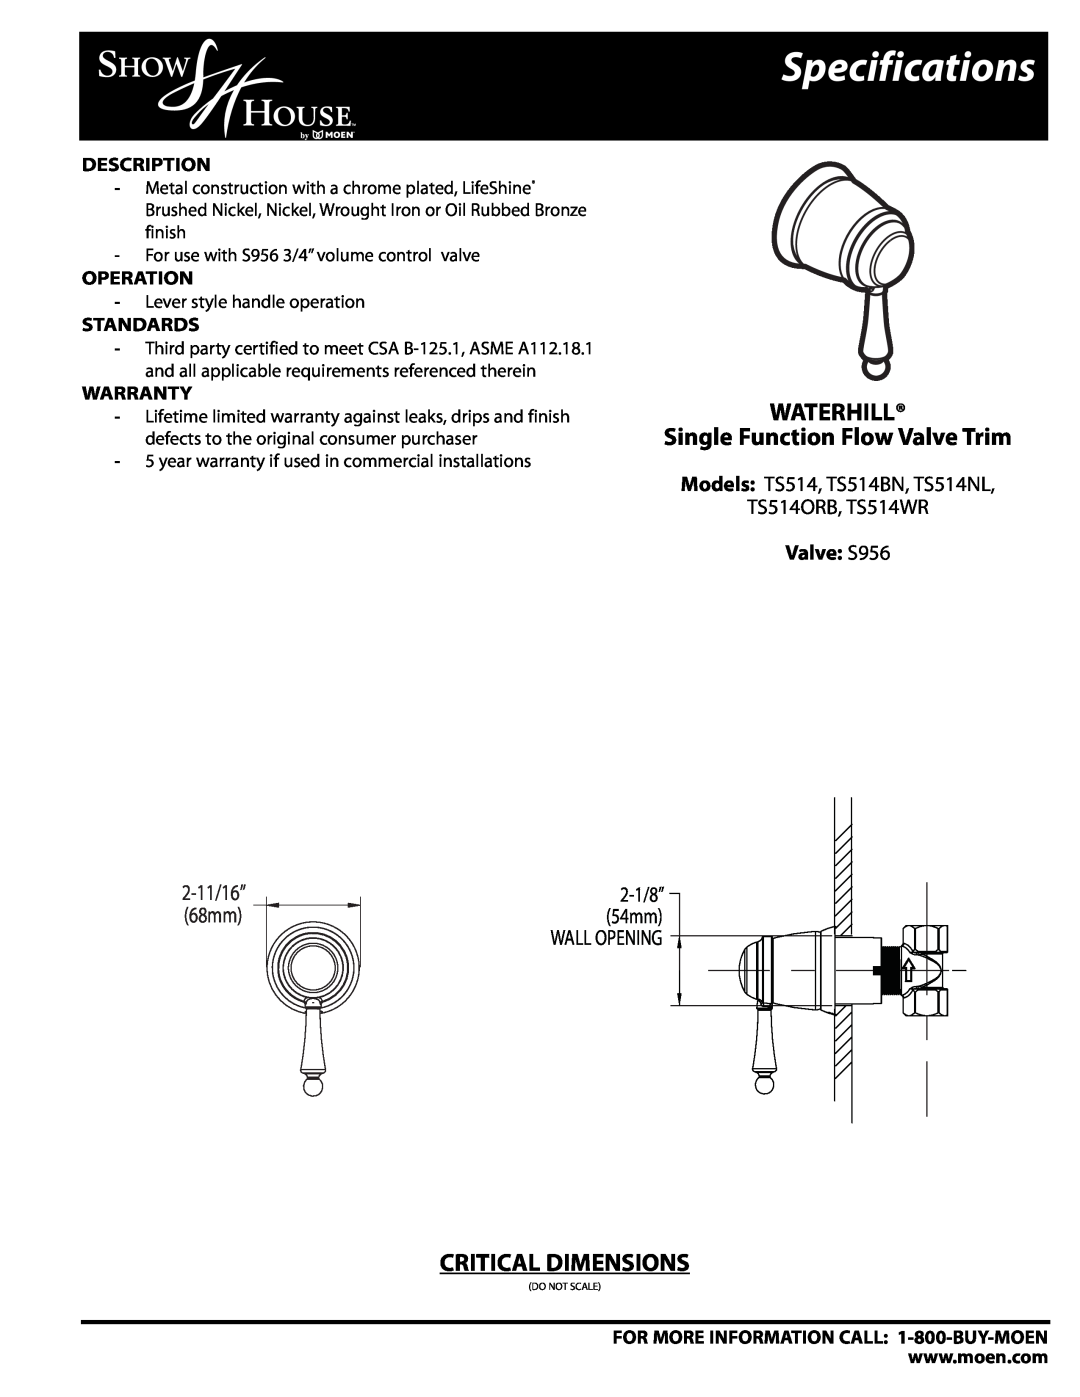 Moen TS516WR WATERHILL Single Function Flow Valve Trim, Critical Dimensions, Valve S956, Specifications, Wall Opening 